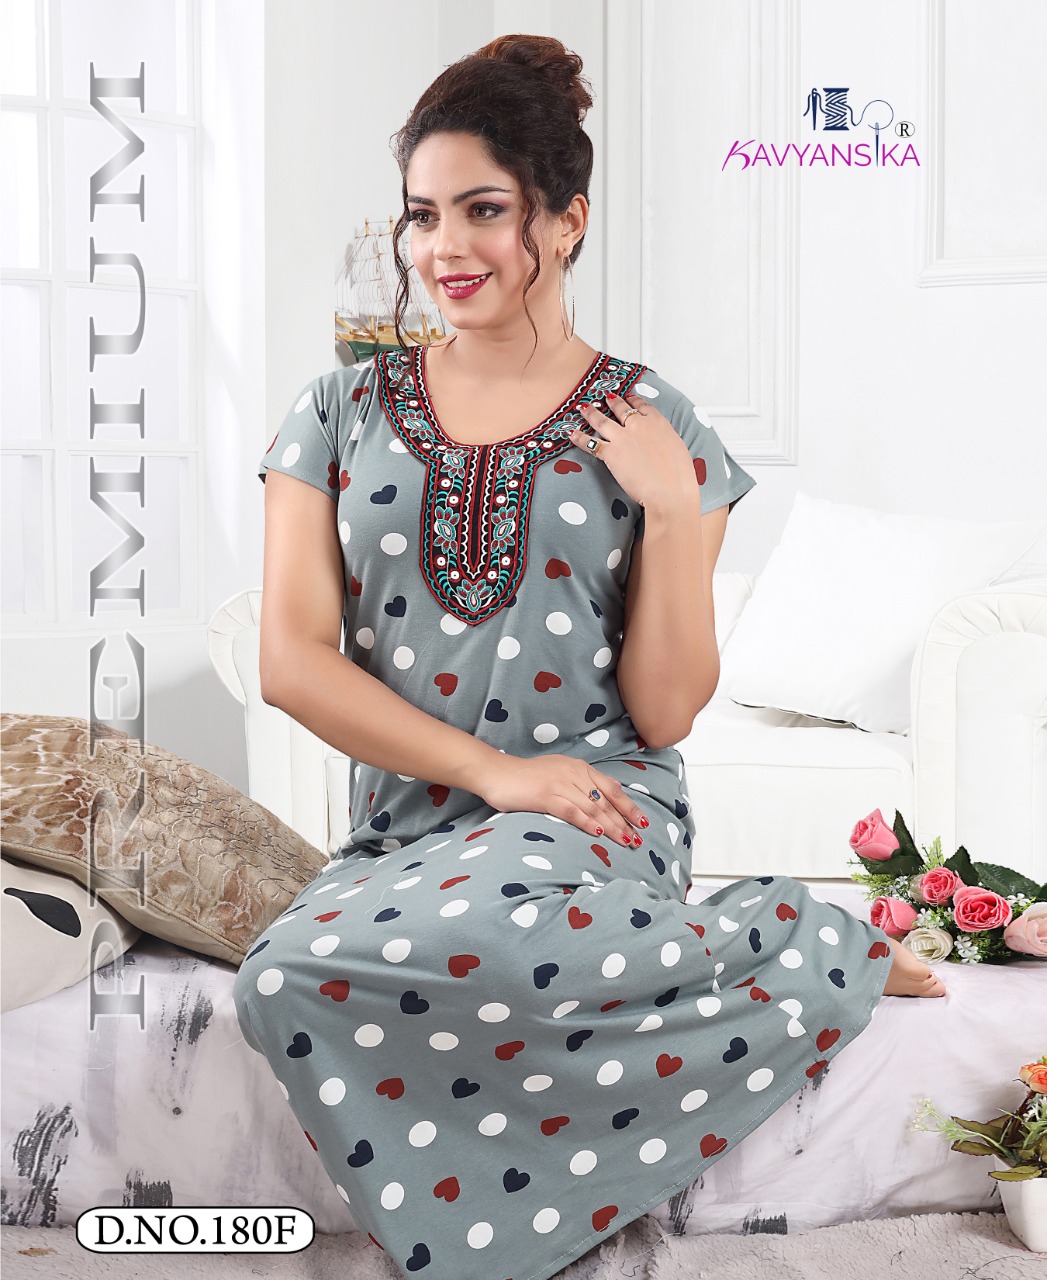 Kavyansika Presents Premium Vol-180 180a - 180f Series Patterned Hosiery Fancy Designer And Soft Waving Nighty Night Wear Collection